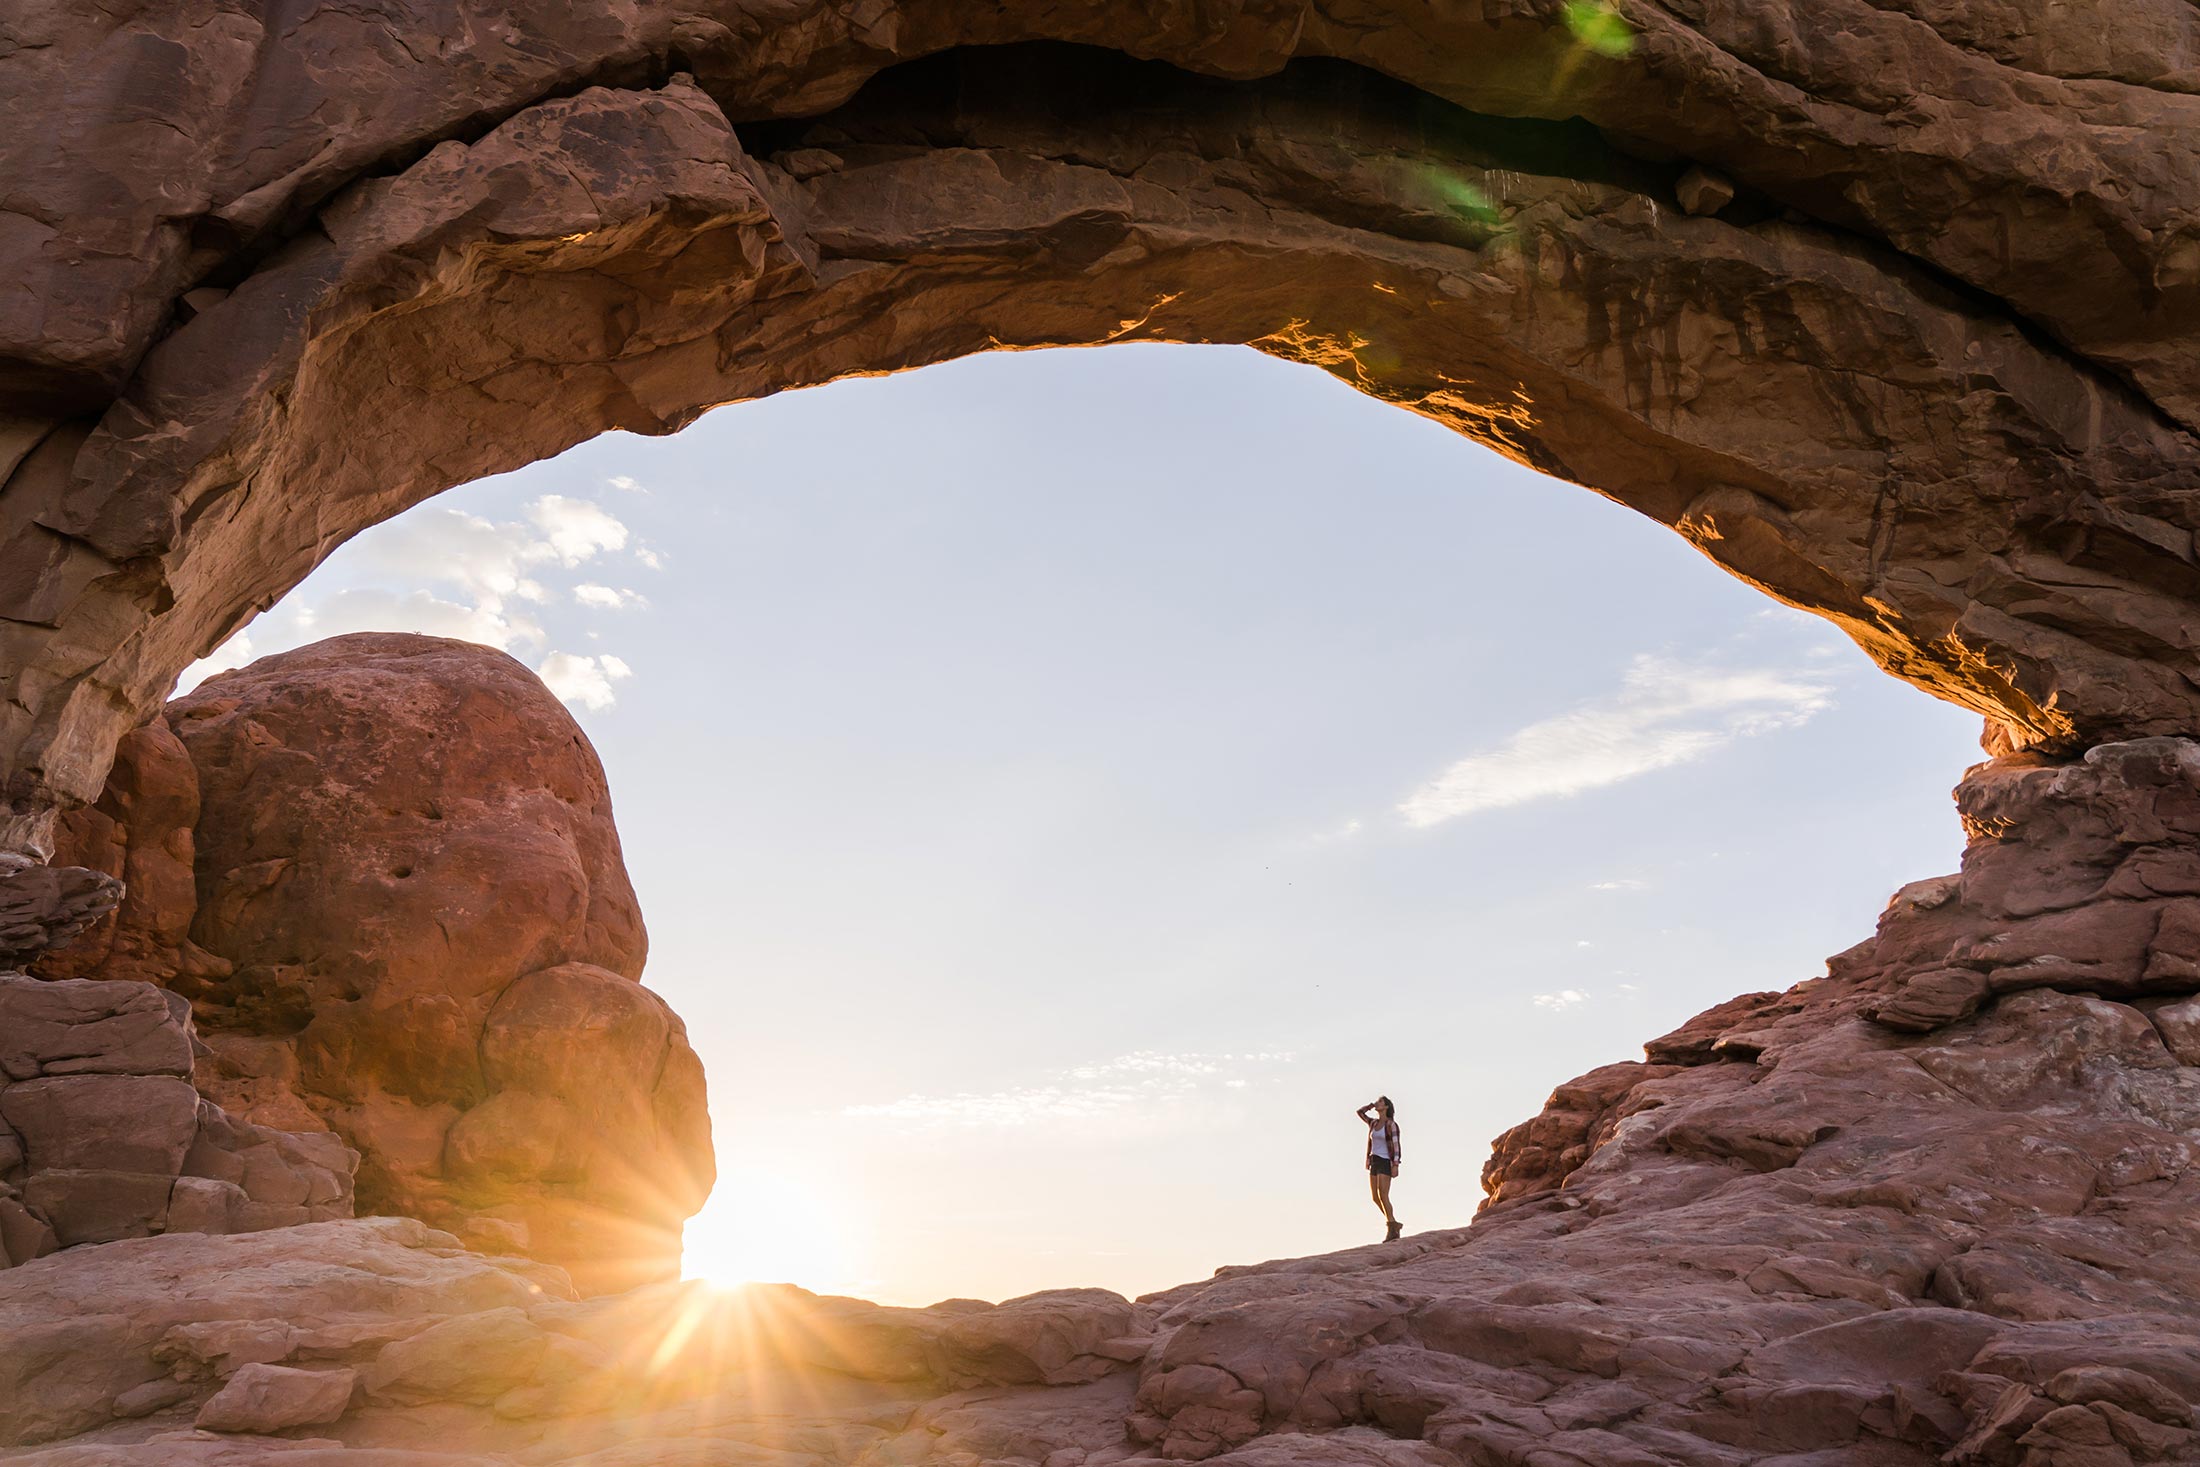 View of hiker under red rock arch in Moab, UT.